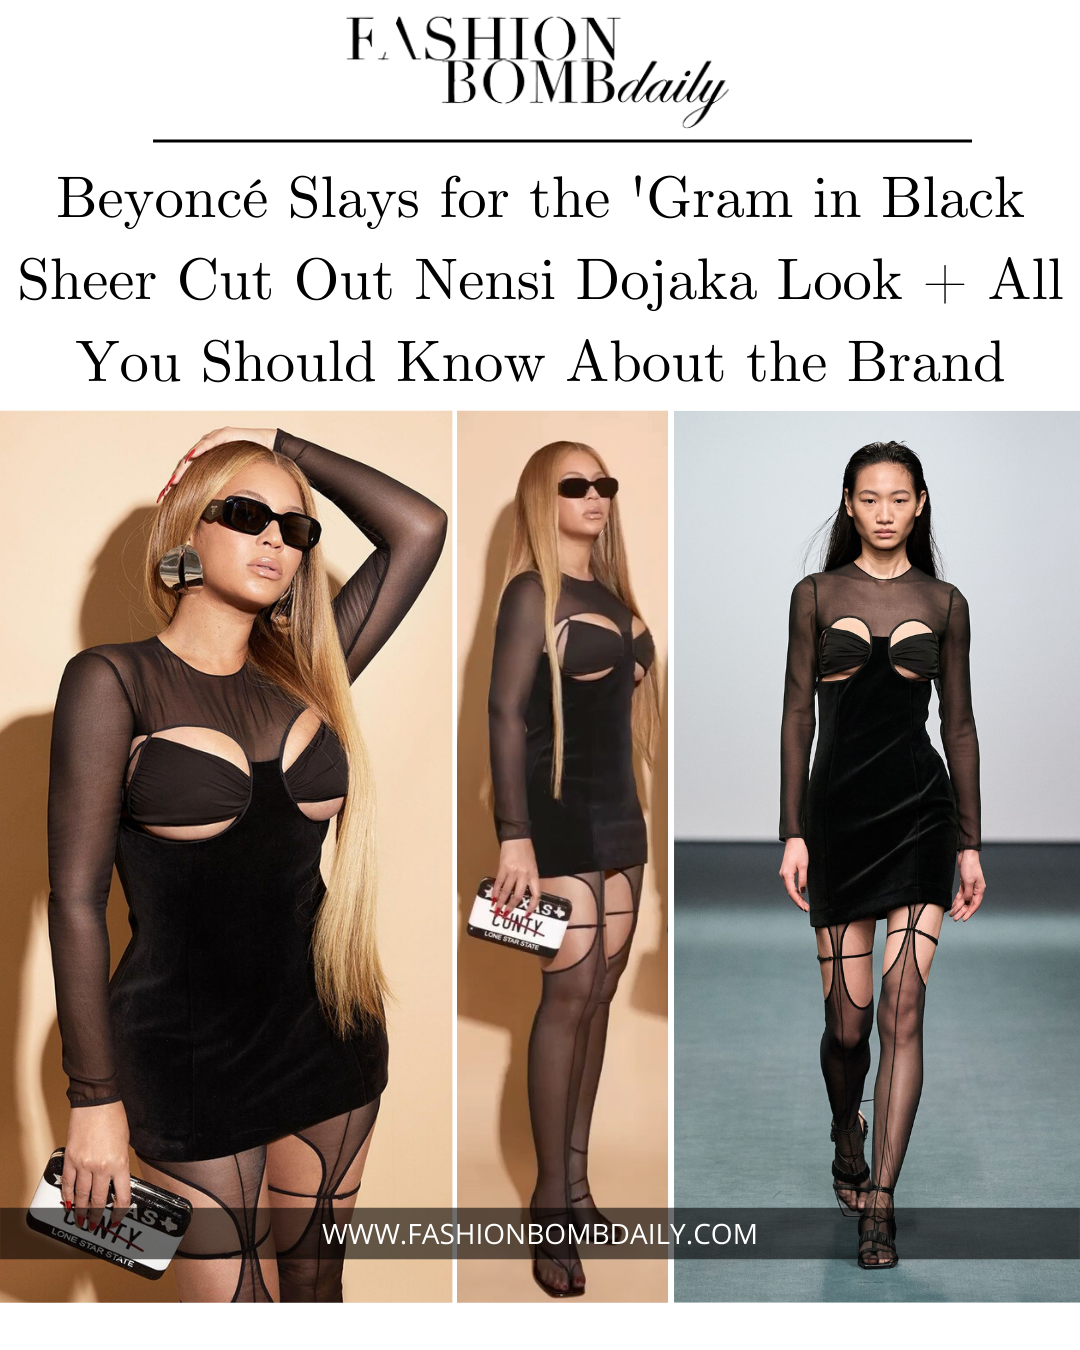 Beyoncé Slays for the 'Gram in Black Sheer Cut Out Nensi Dojaka Look + All  You Should Know About the Brand – Fashion Bomb Daily